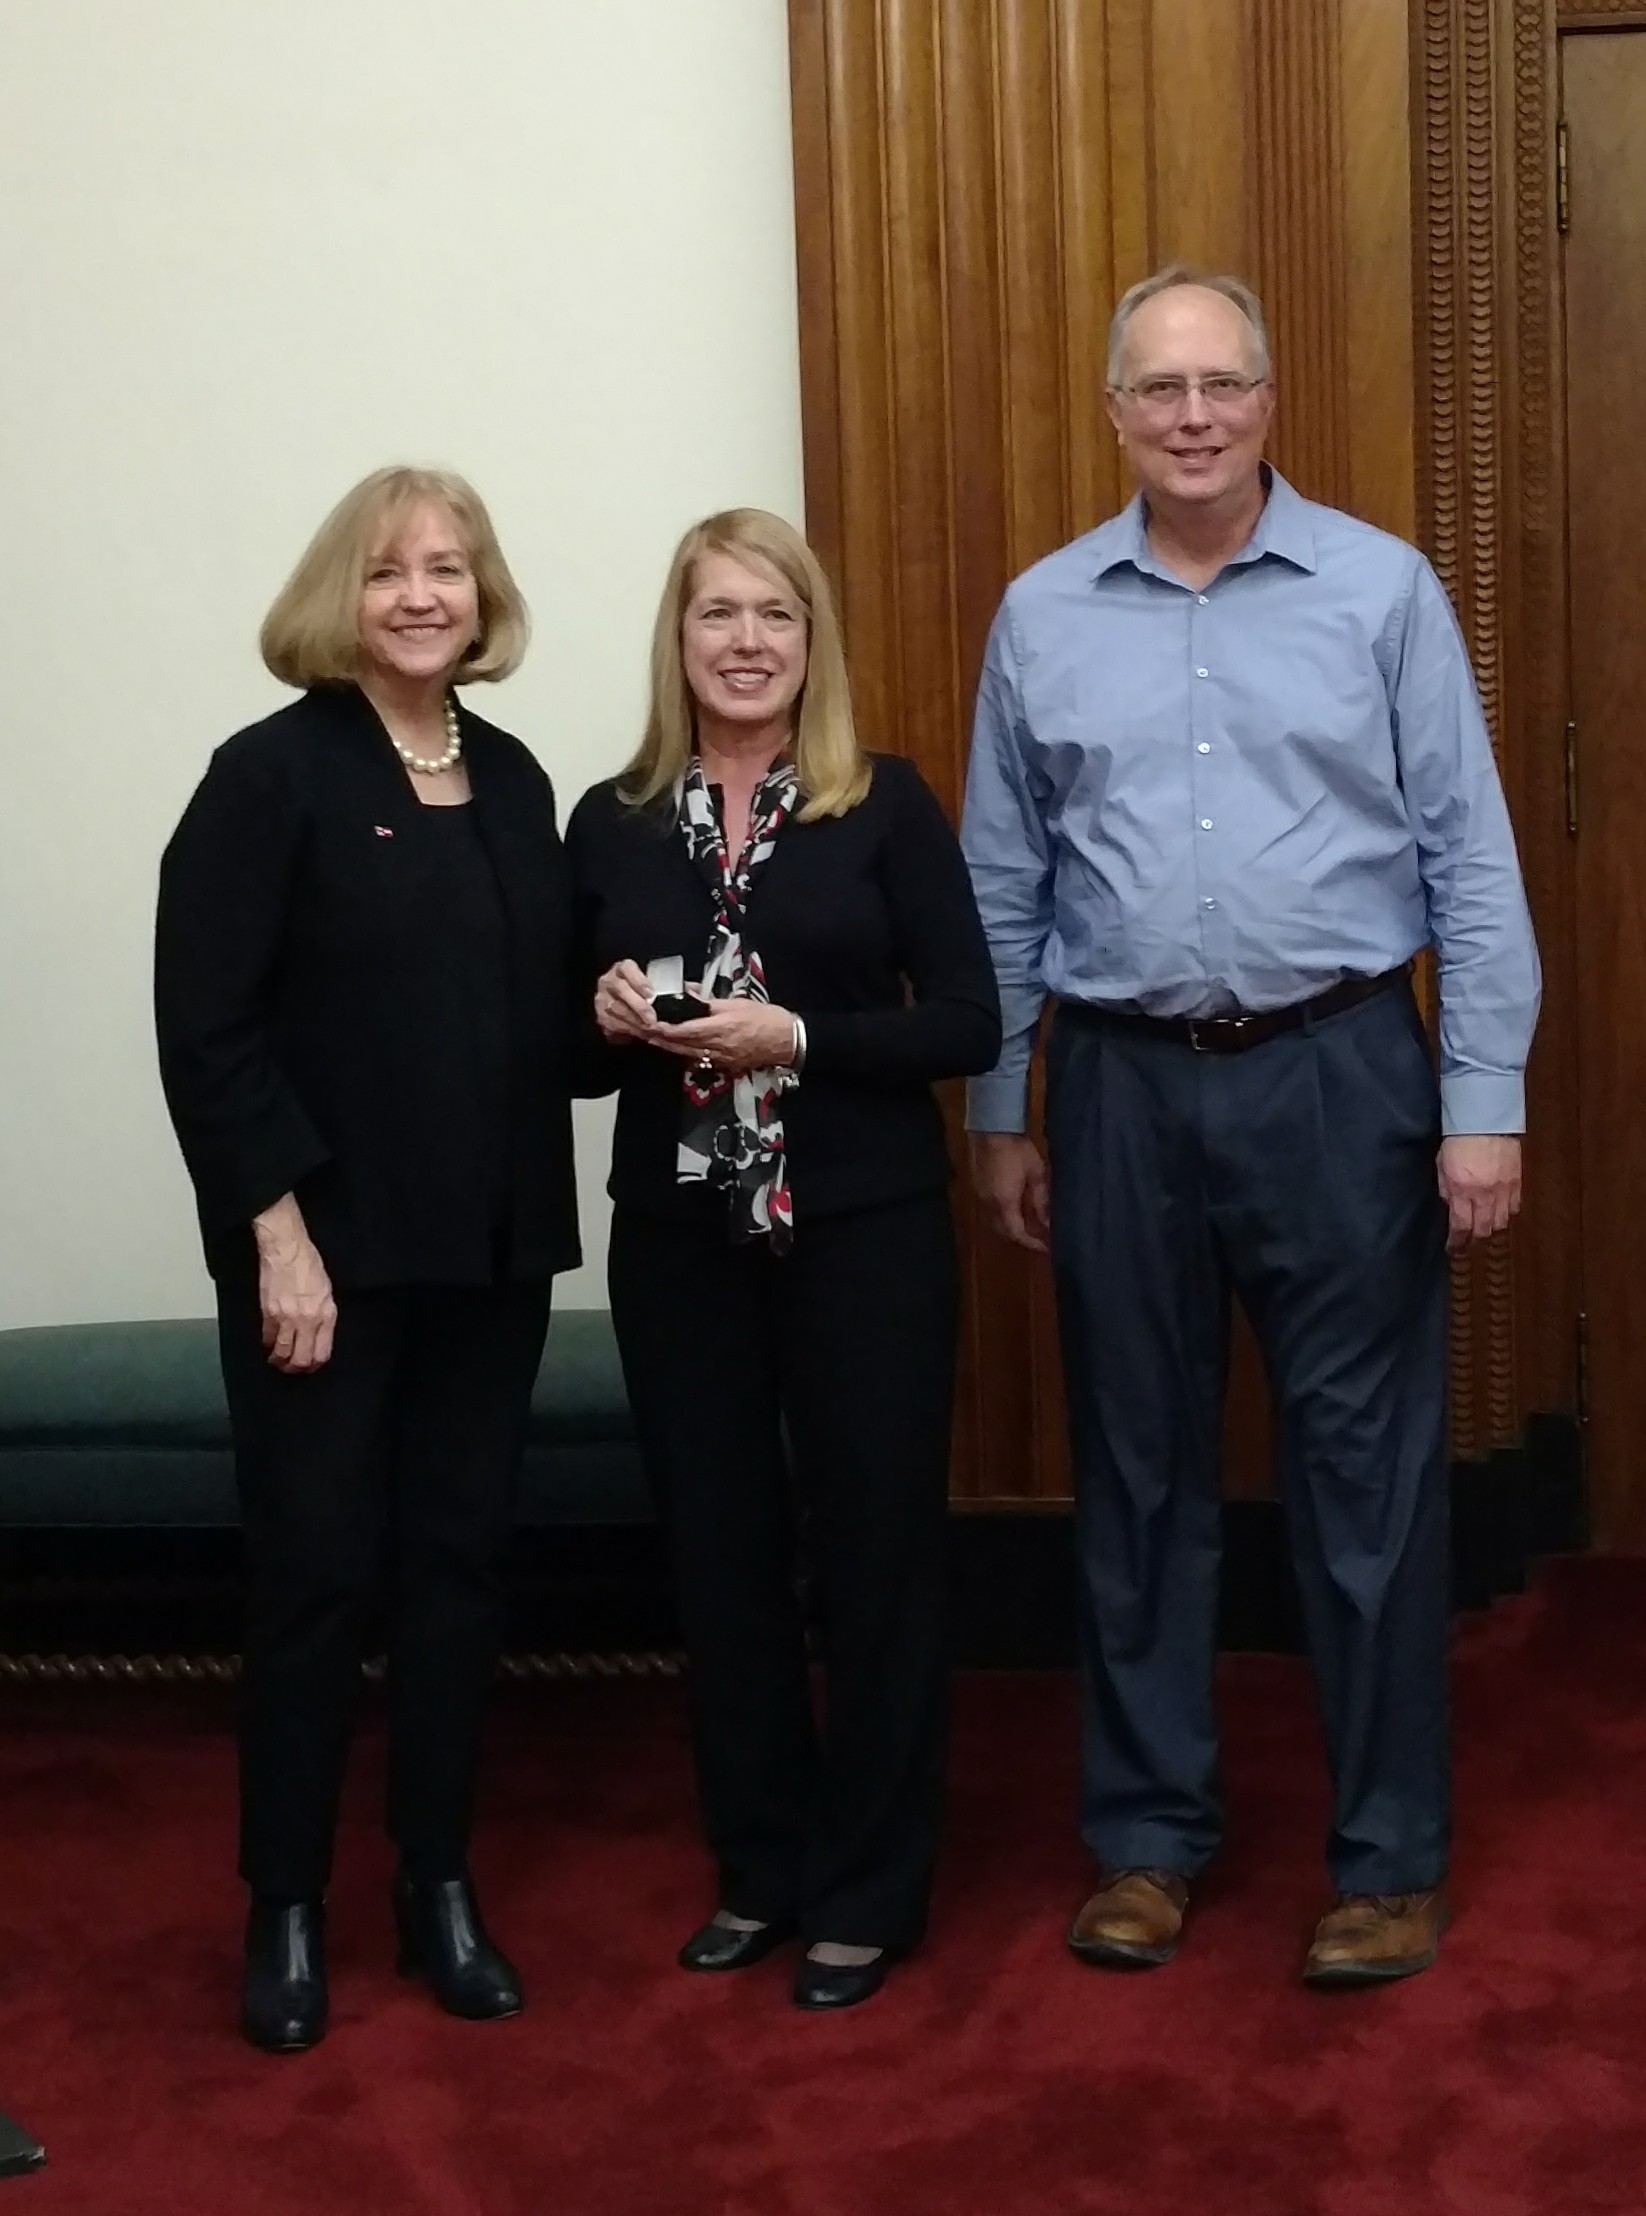 Pictured from left:  Mayor Lyda Krewson, Gladys Kassing and Public Utilities Director Curt Skouby